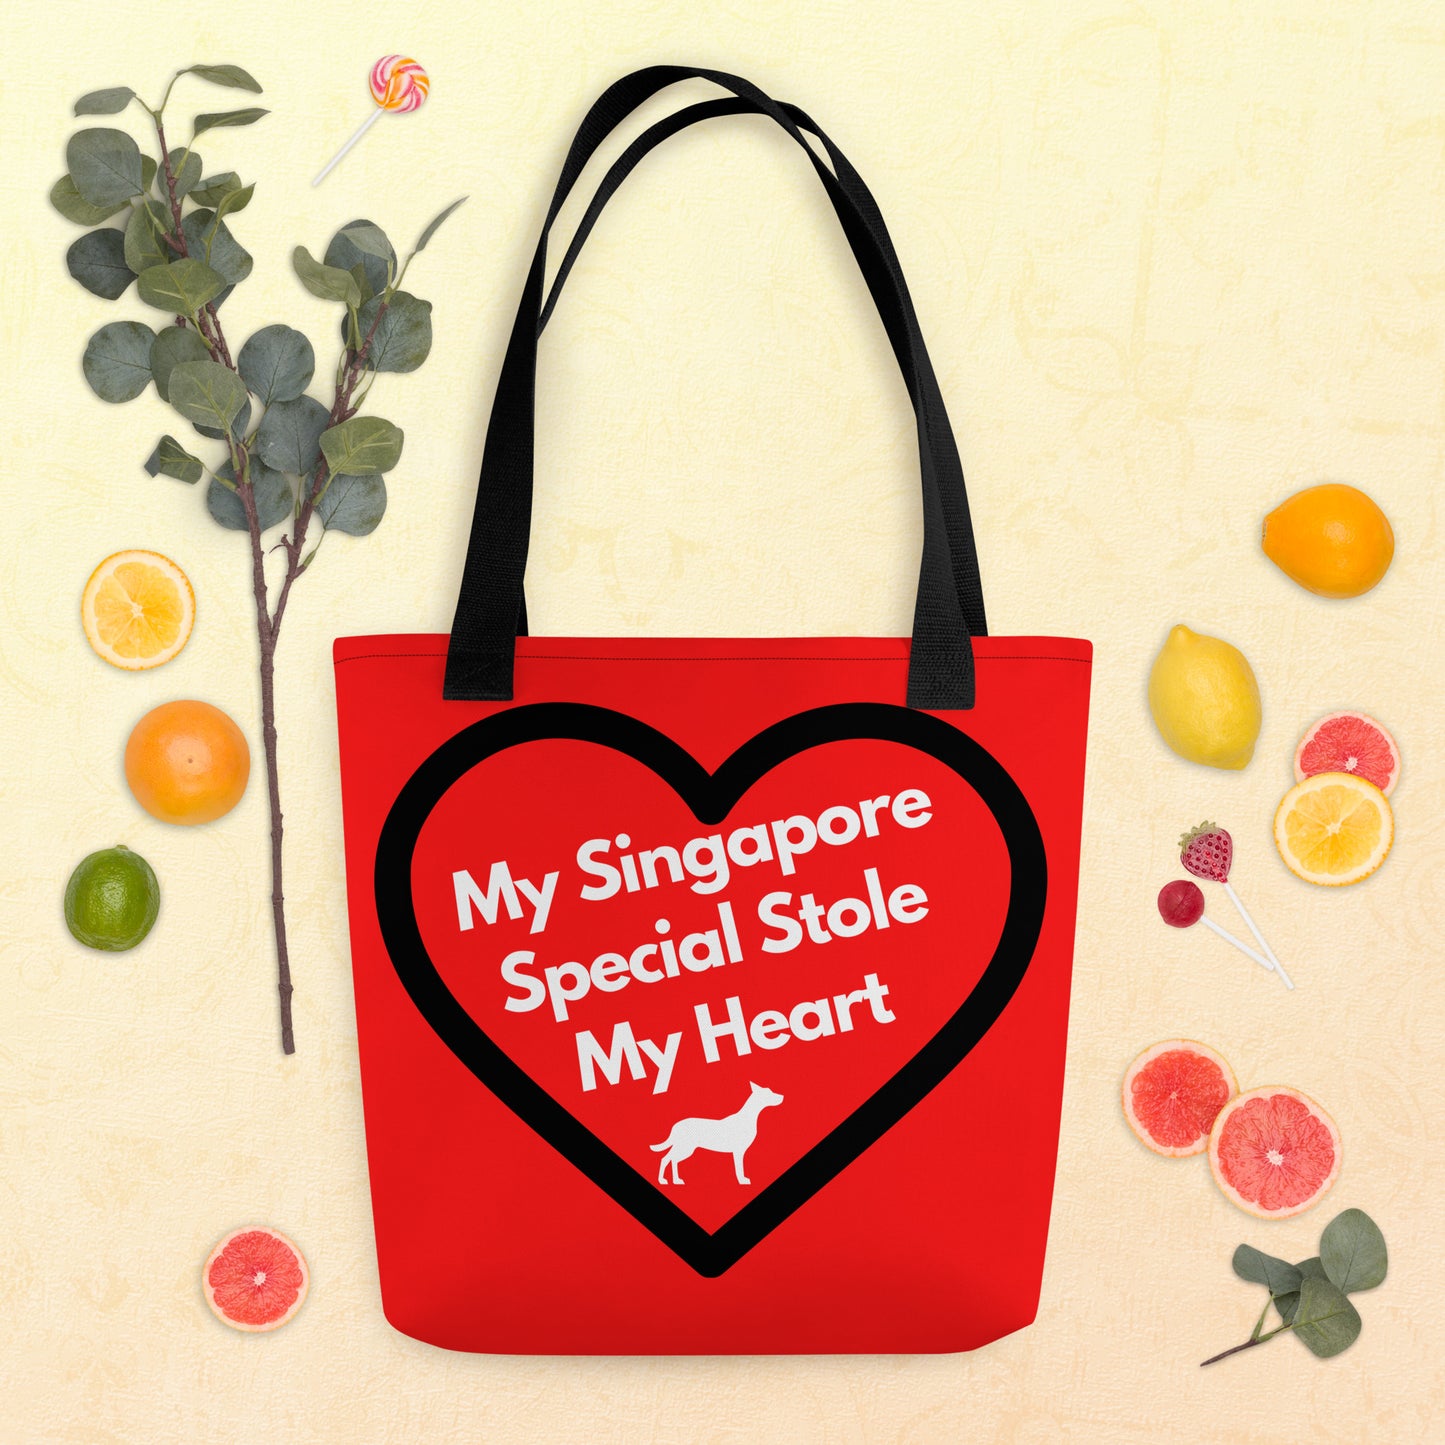 My Singapore Special Stole My Heart, Tote Bag For Dog Lovers